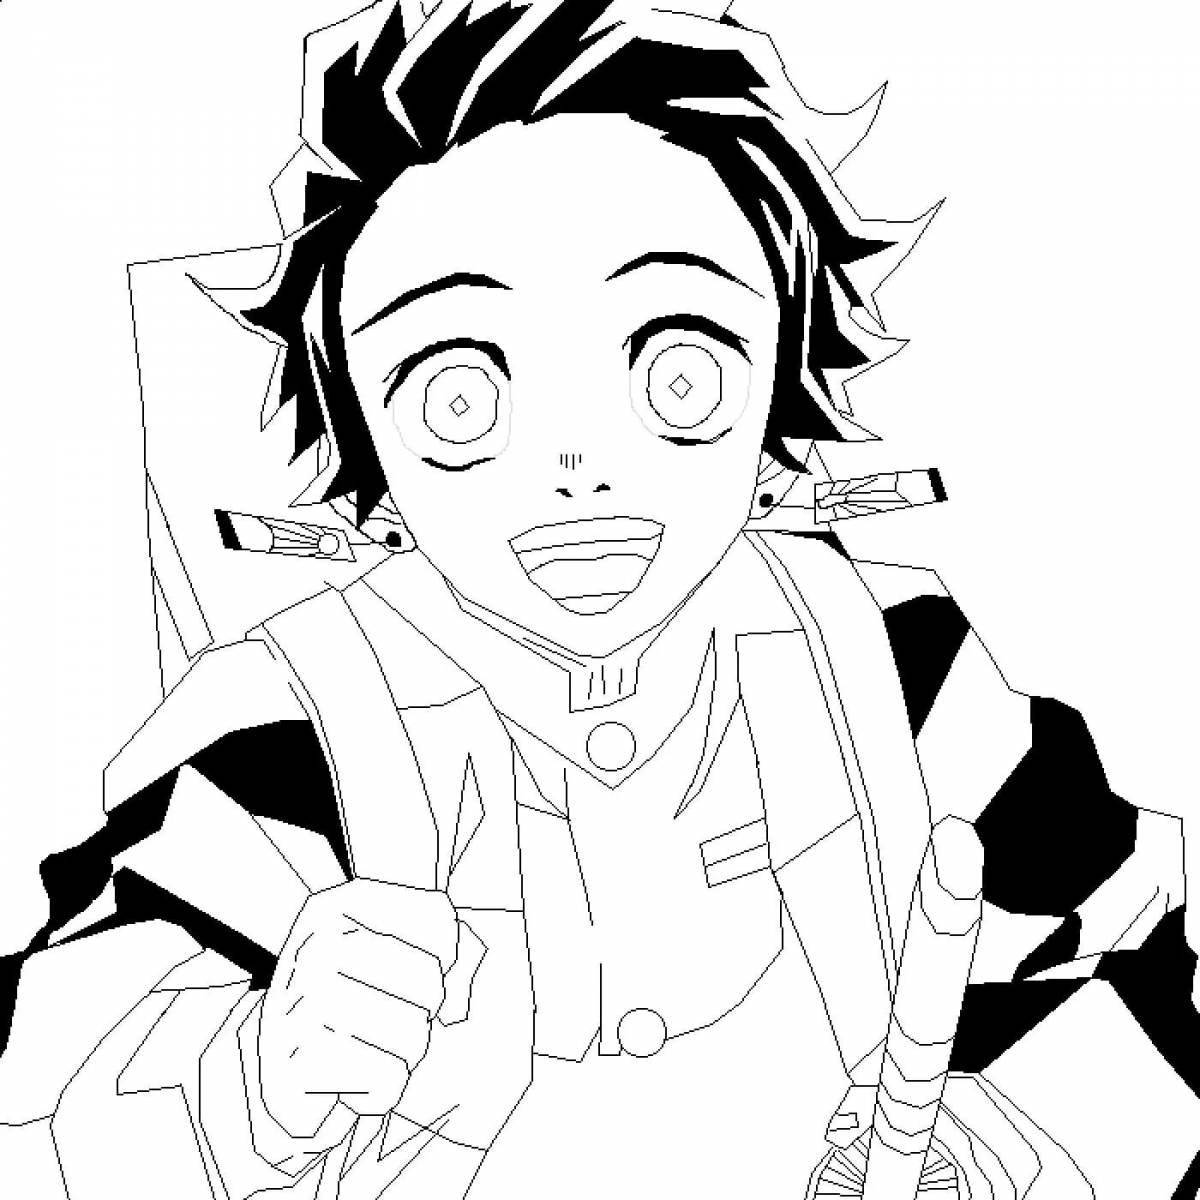 Silent tanjiro coloring page